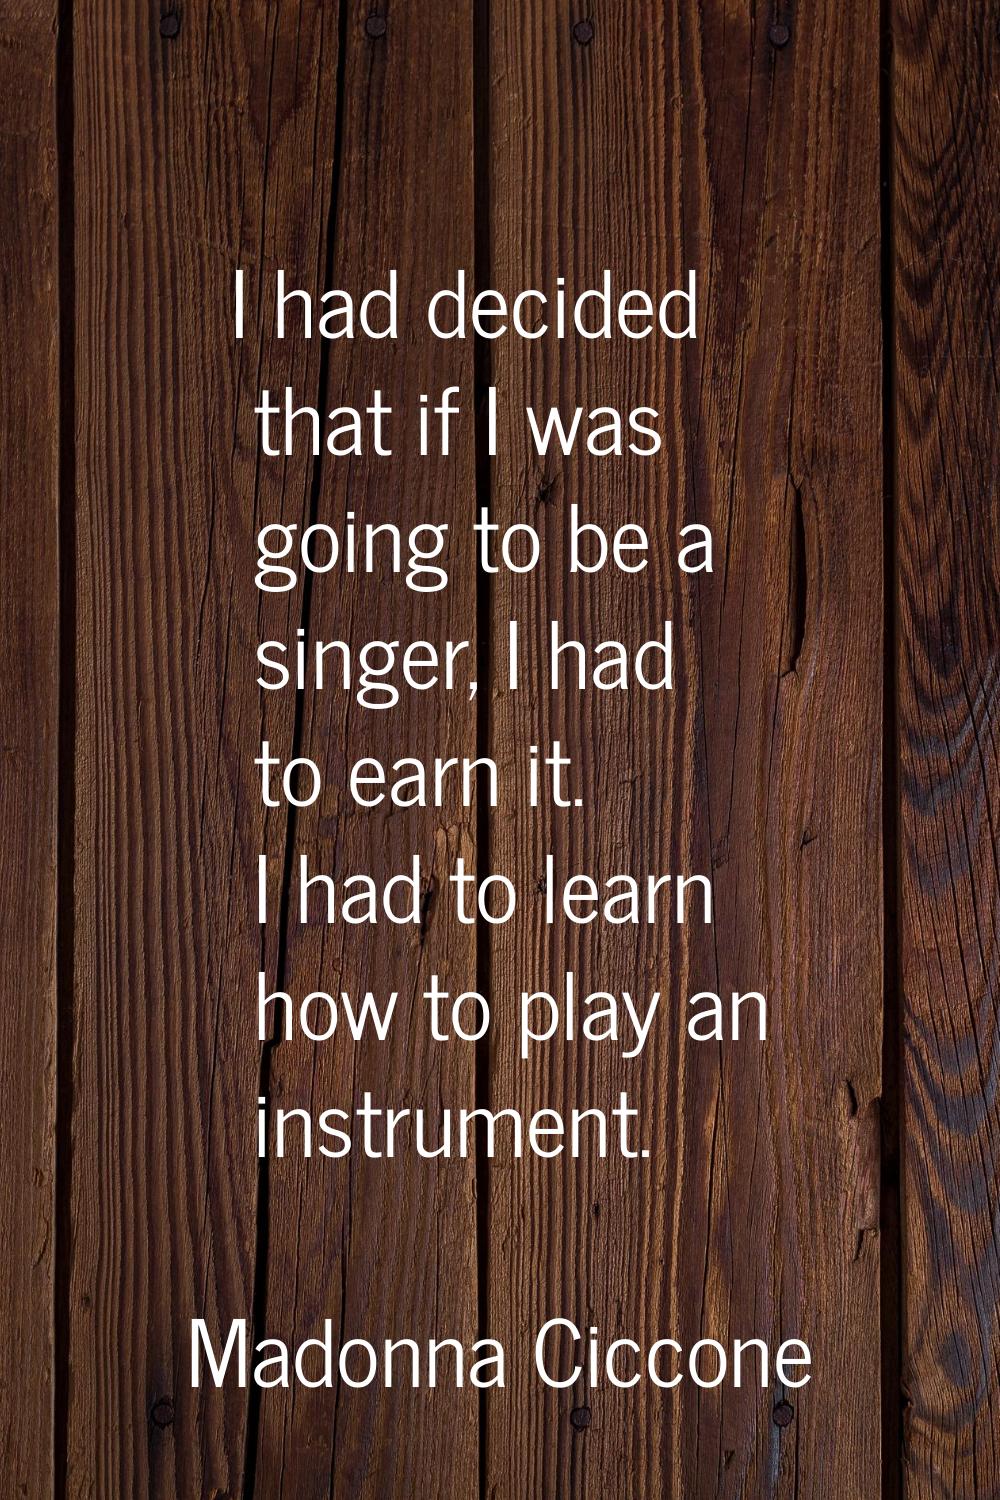 I had decided that if I was going to be a singer, I had to earn it. I had to learn how to play an i